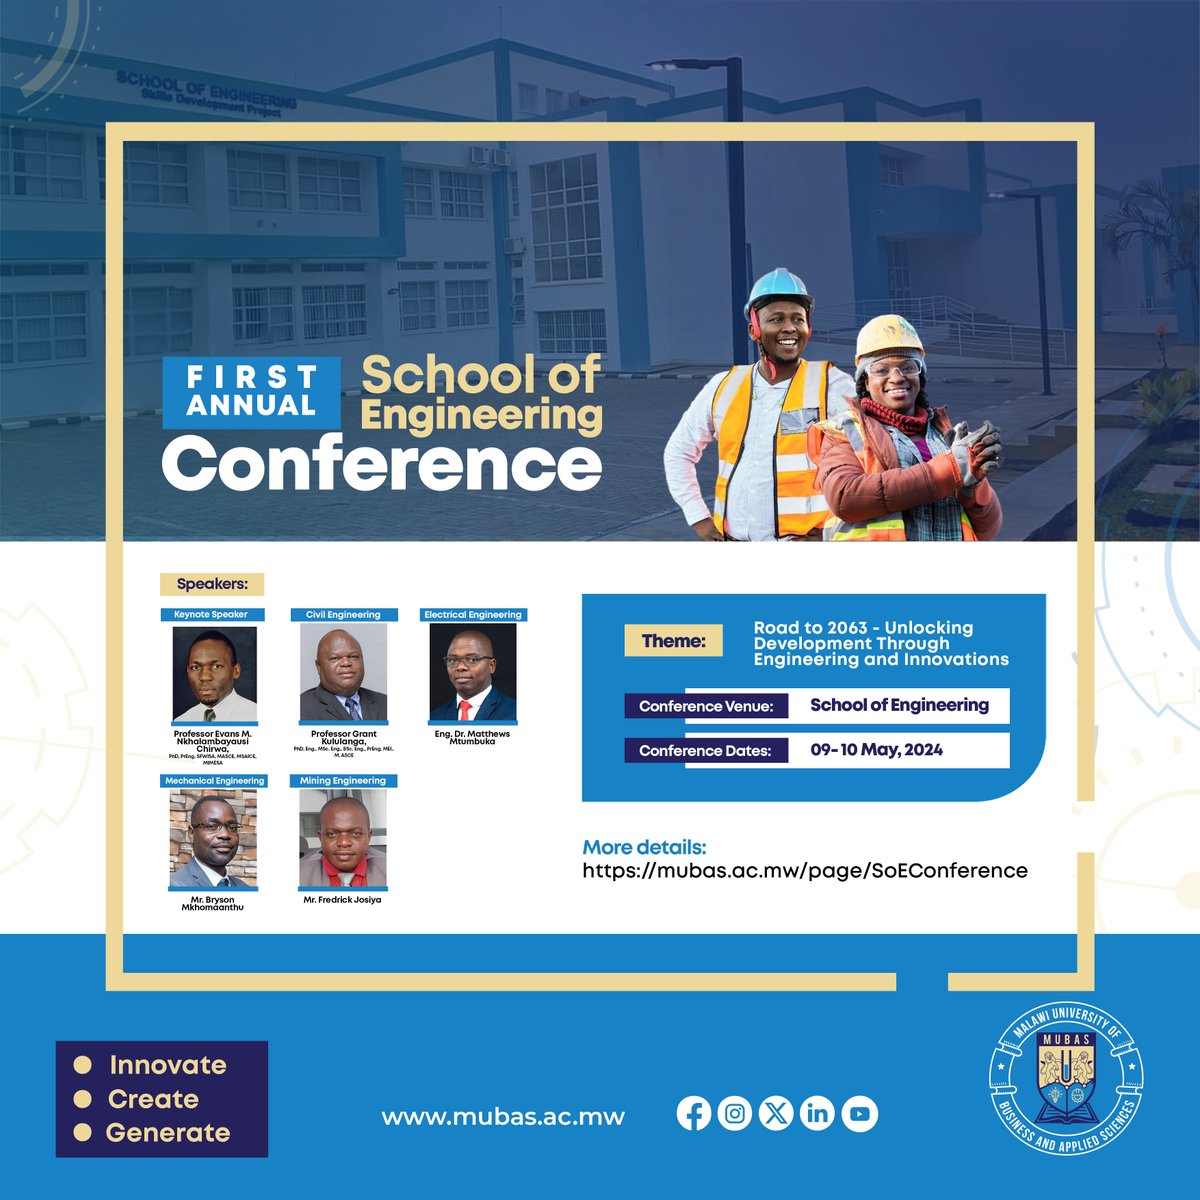 MUBAS is inviting staff, students and the general public to the First Annual School of Engineering Conference which will be held under the theme: Road to 2063 - Unlocking Development Through Engineering and Innovations. More details: mubas.ac.mw/page/SoEConfer… #SoEConference